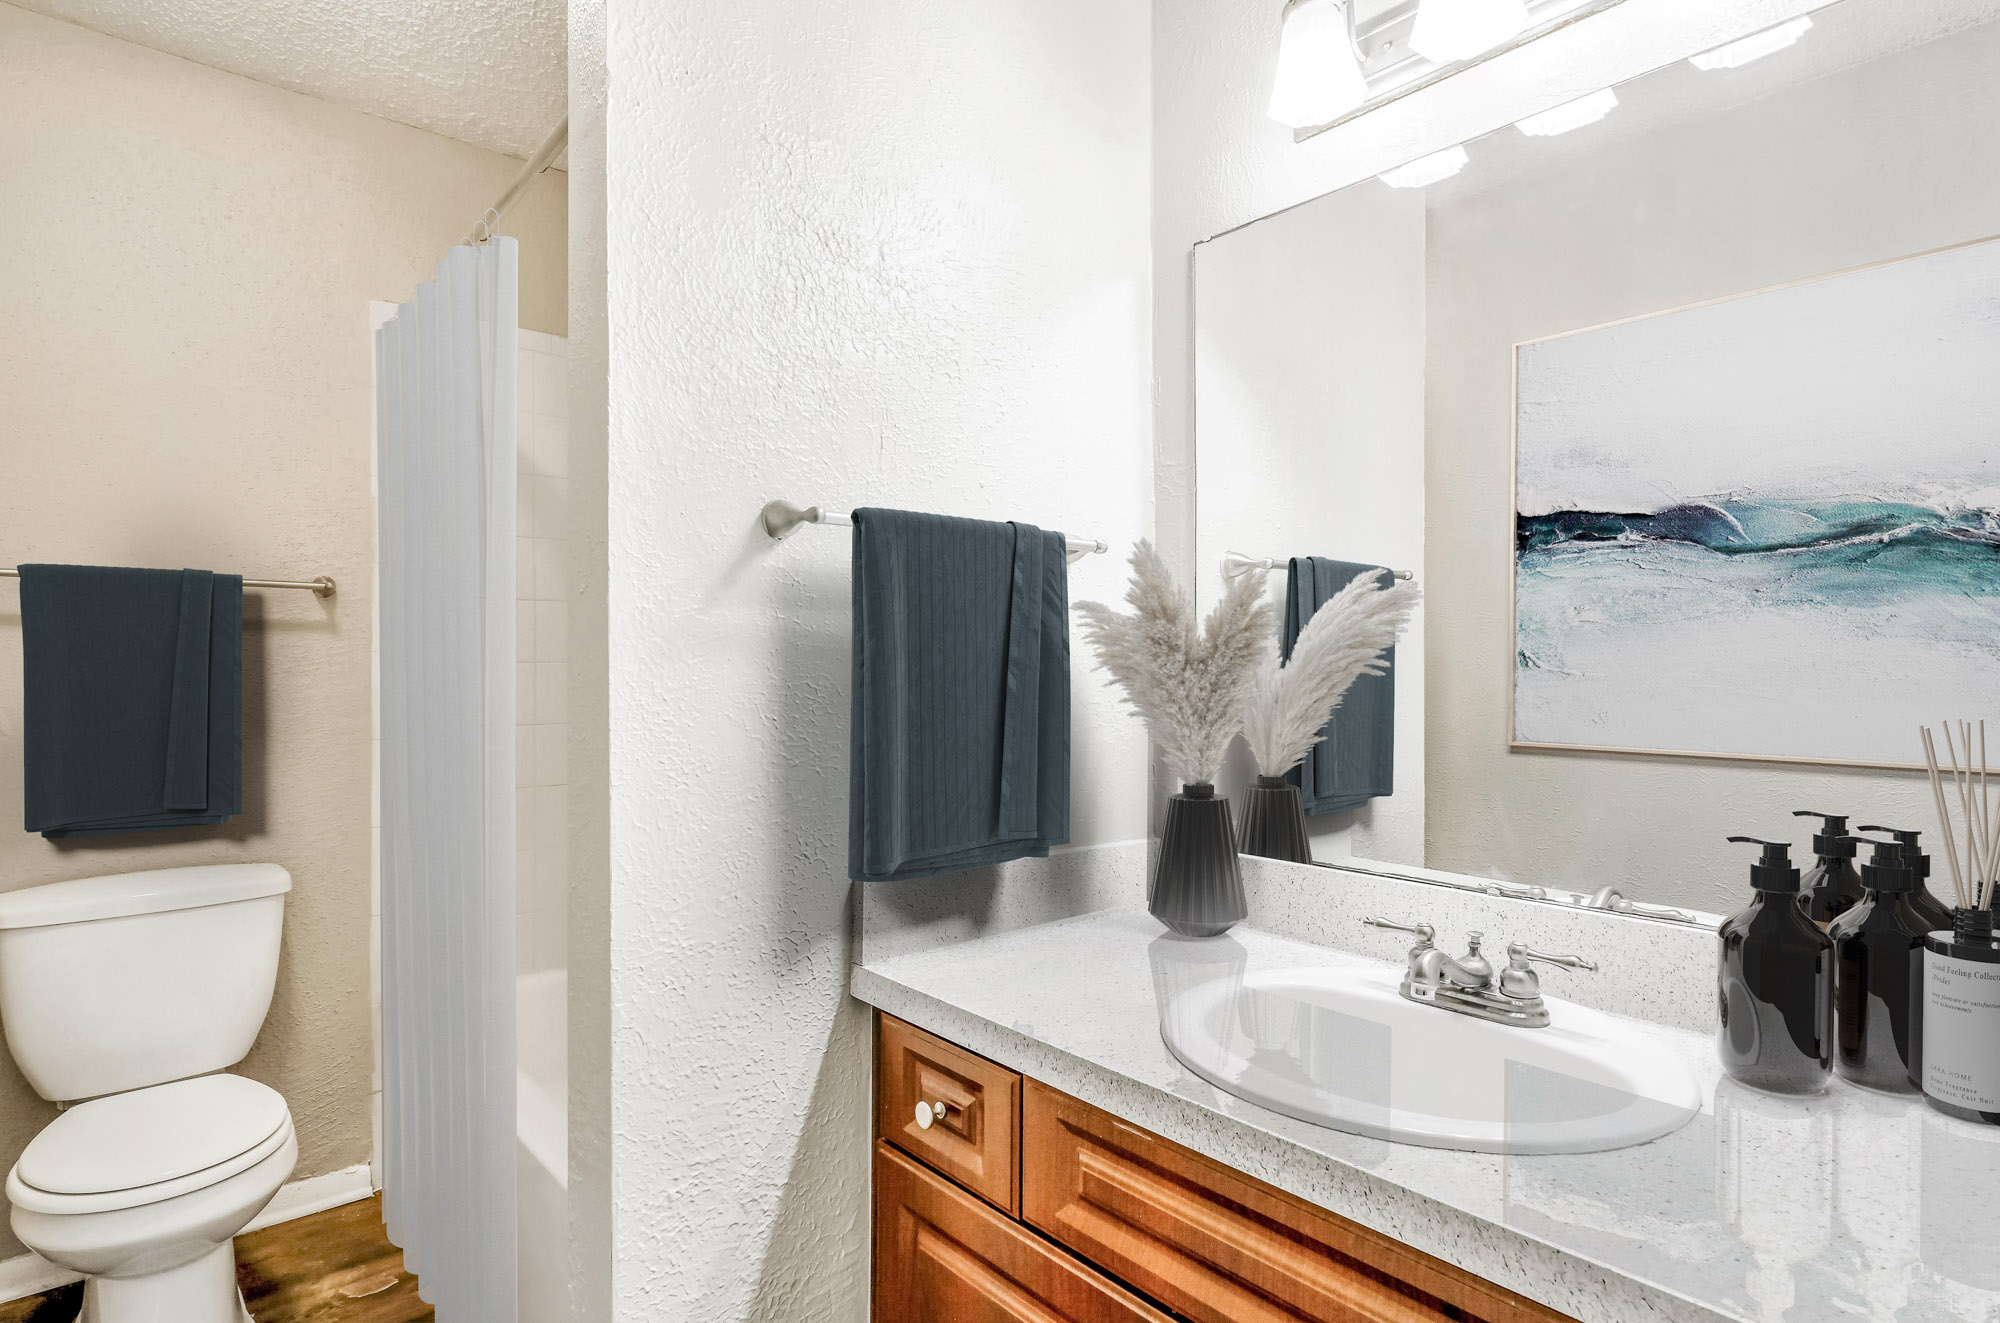 The bathroom in an apartment in St. James Crossing in Tampa, Florida.